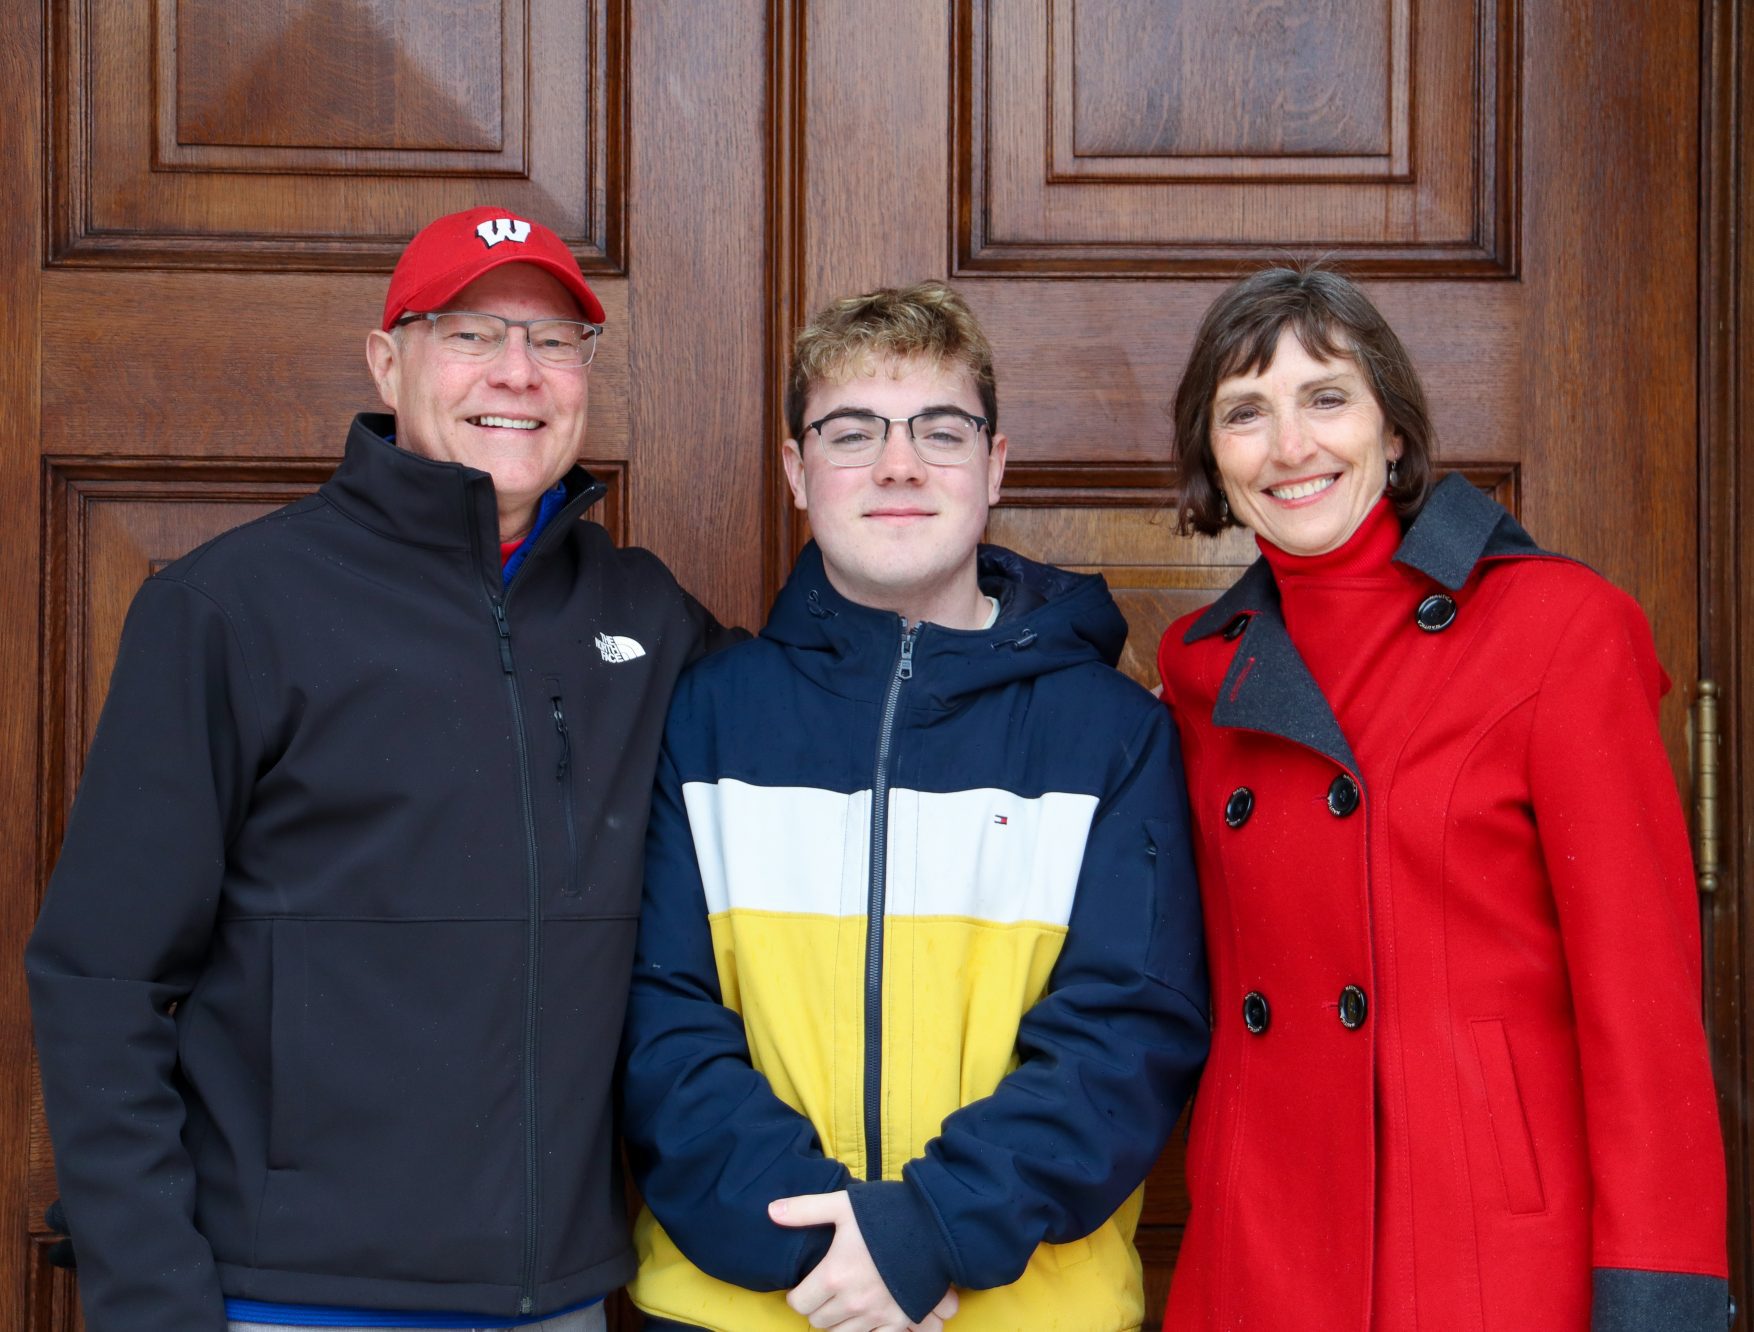 Big Couple Bruce & Di with Little Brother James at the Wisconsin State Capitol